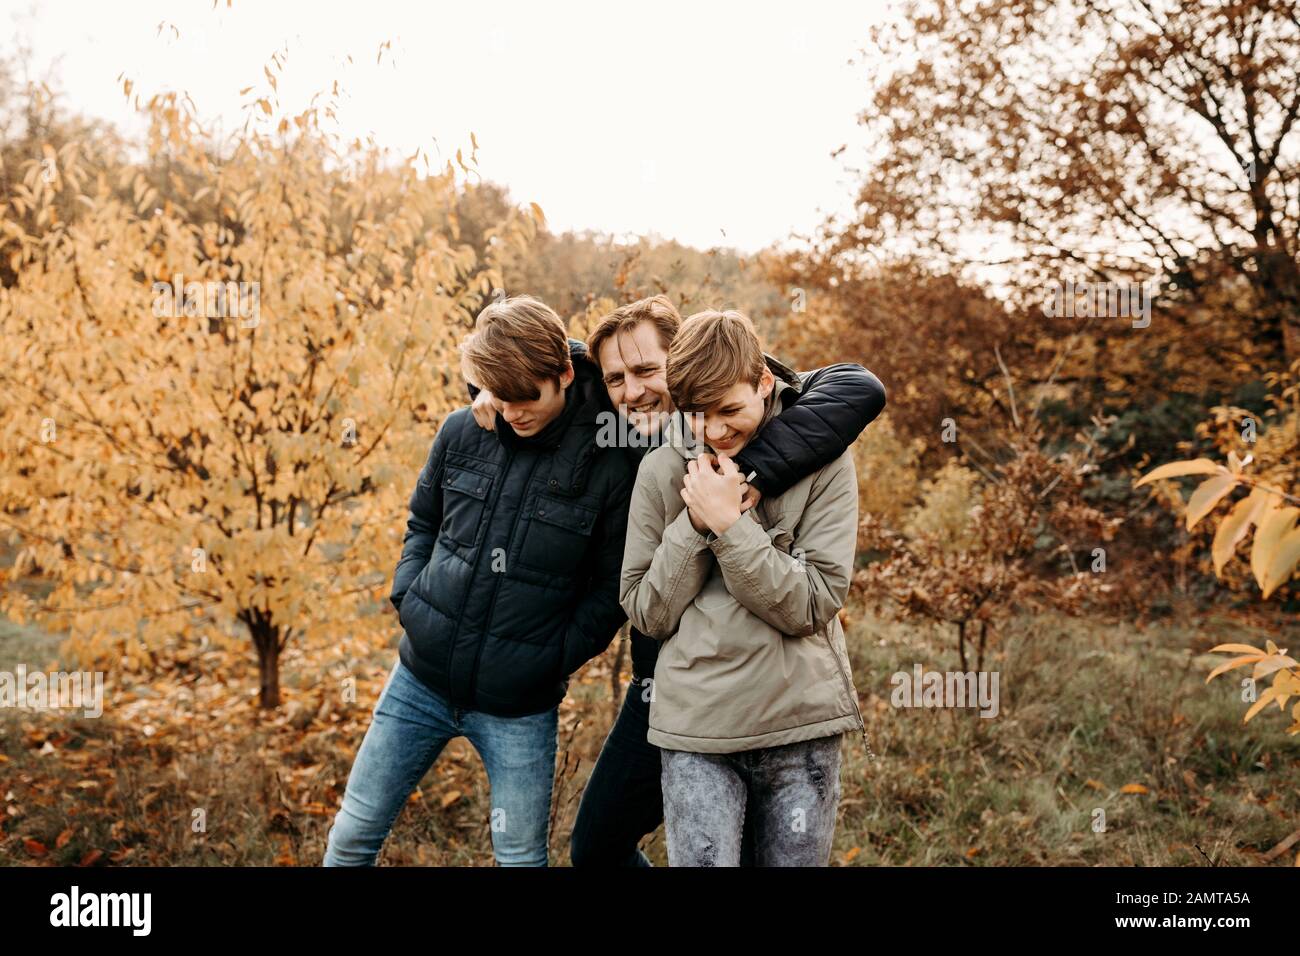 Portrait of a father with his two sons in rural landscape, Netherlands Stock Photo